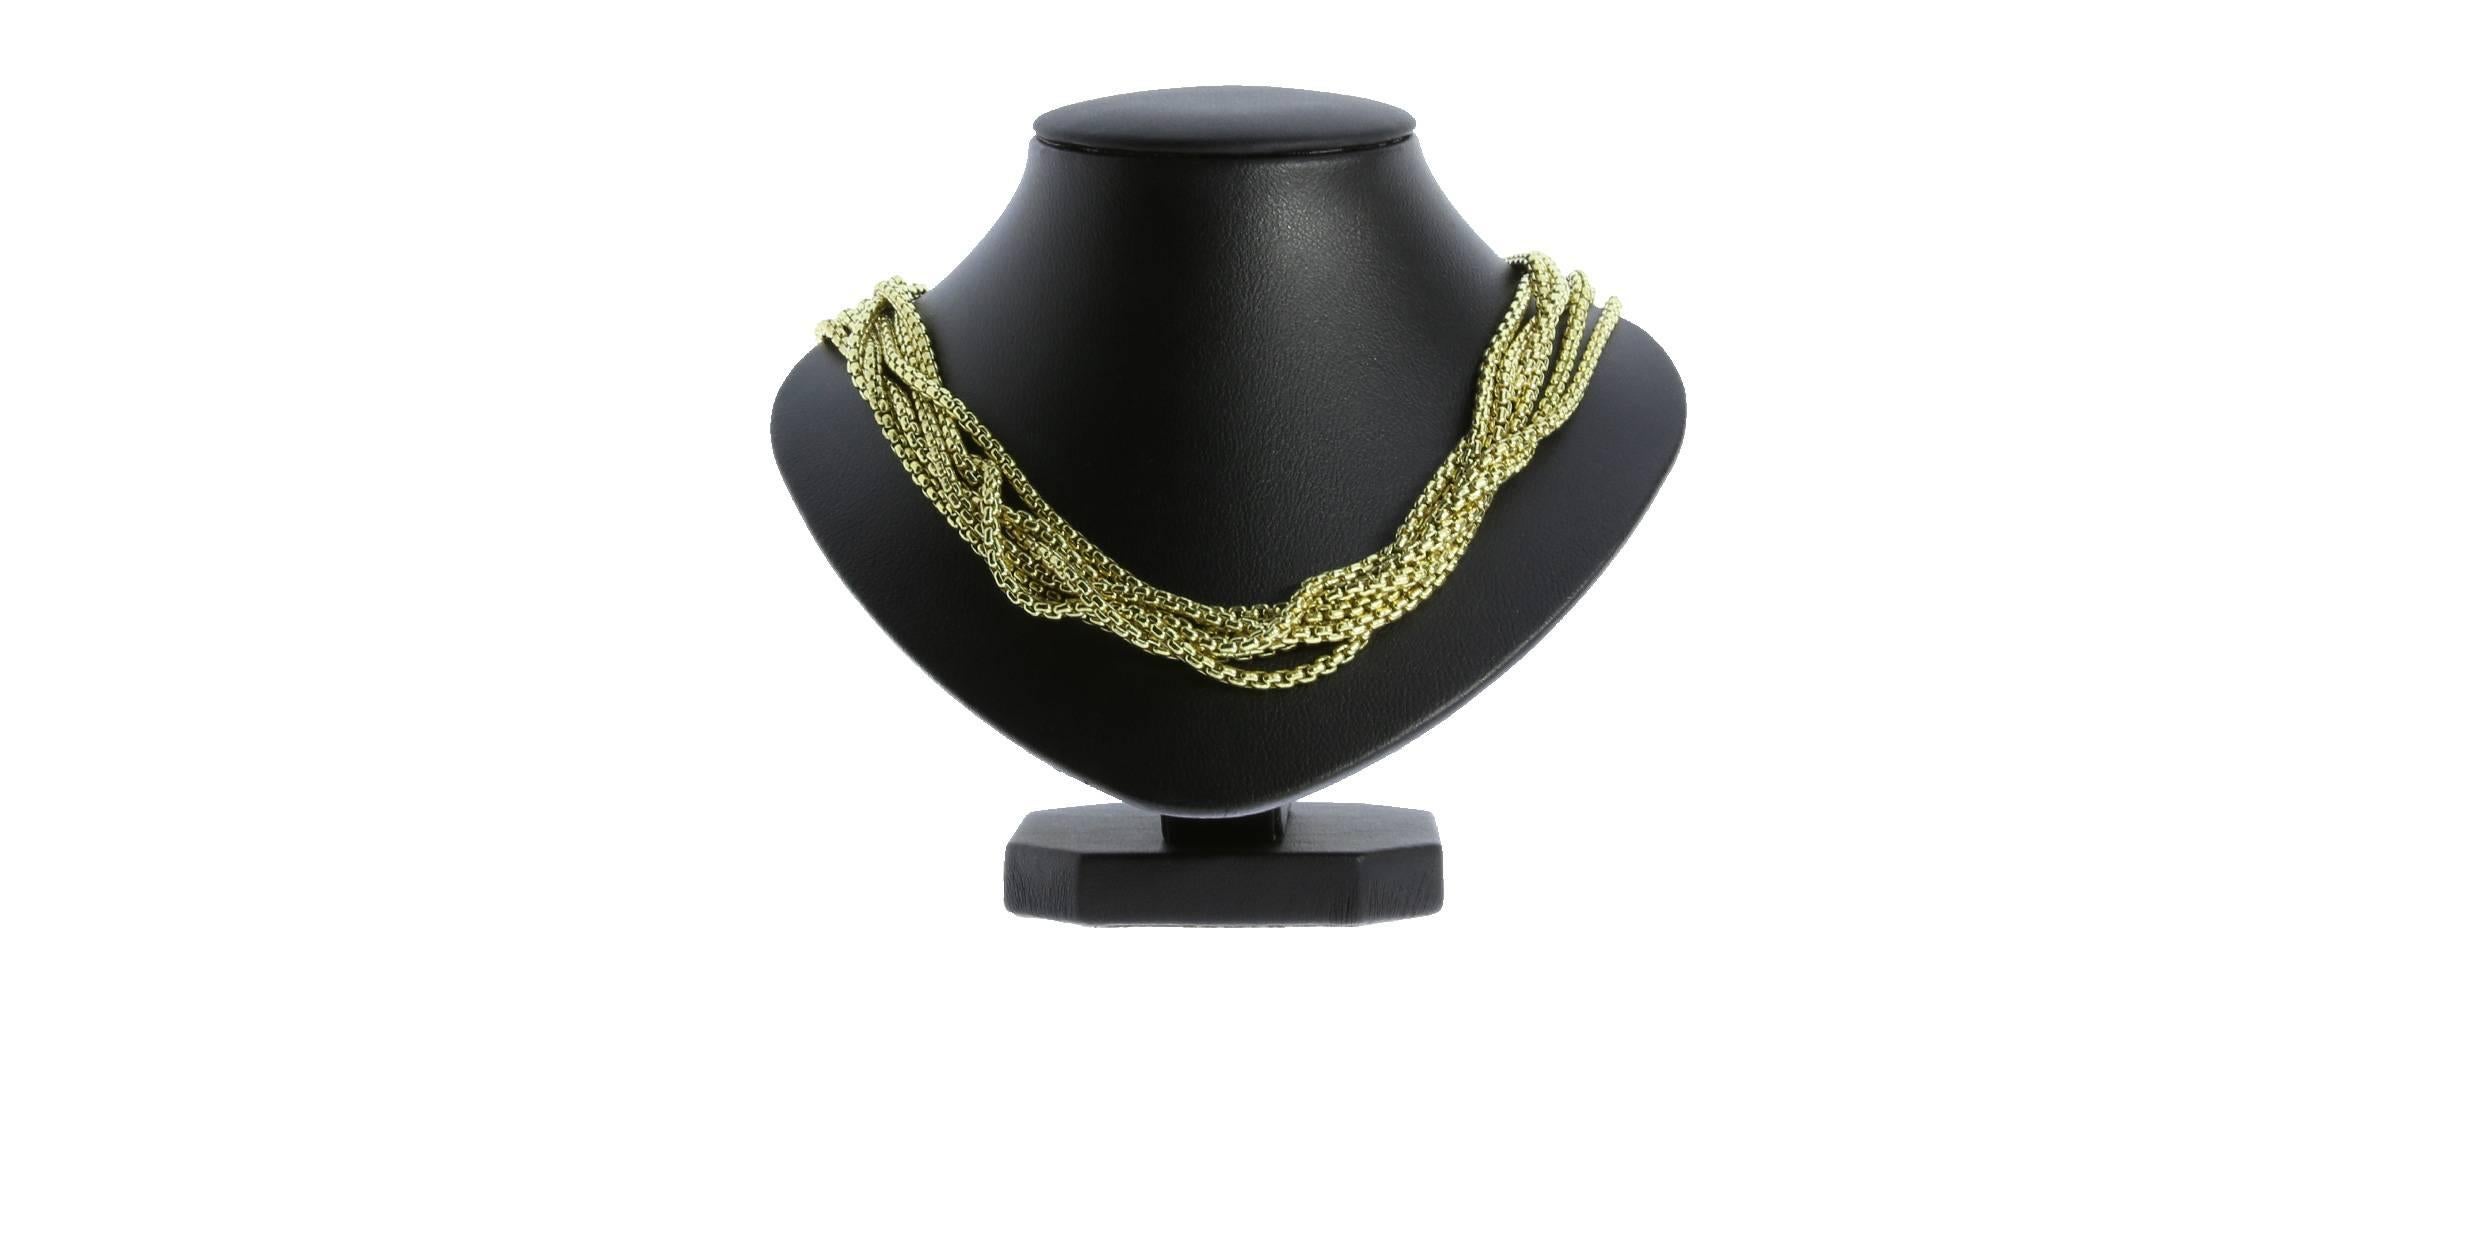 This is a beautiful statement necklace from David Yurman in classic 18 karat yellow gold. The 15.5" necklace features 6 strands of yellow gold box chain with a lobster claw clasp. Whether you're dressed for black tie or blue jeans, this